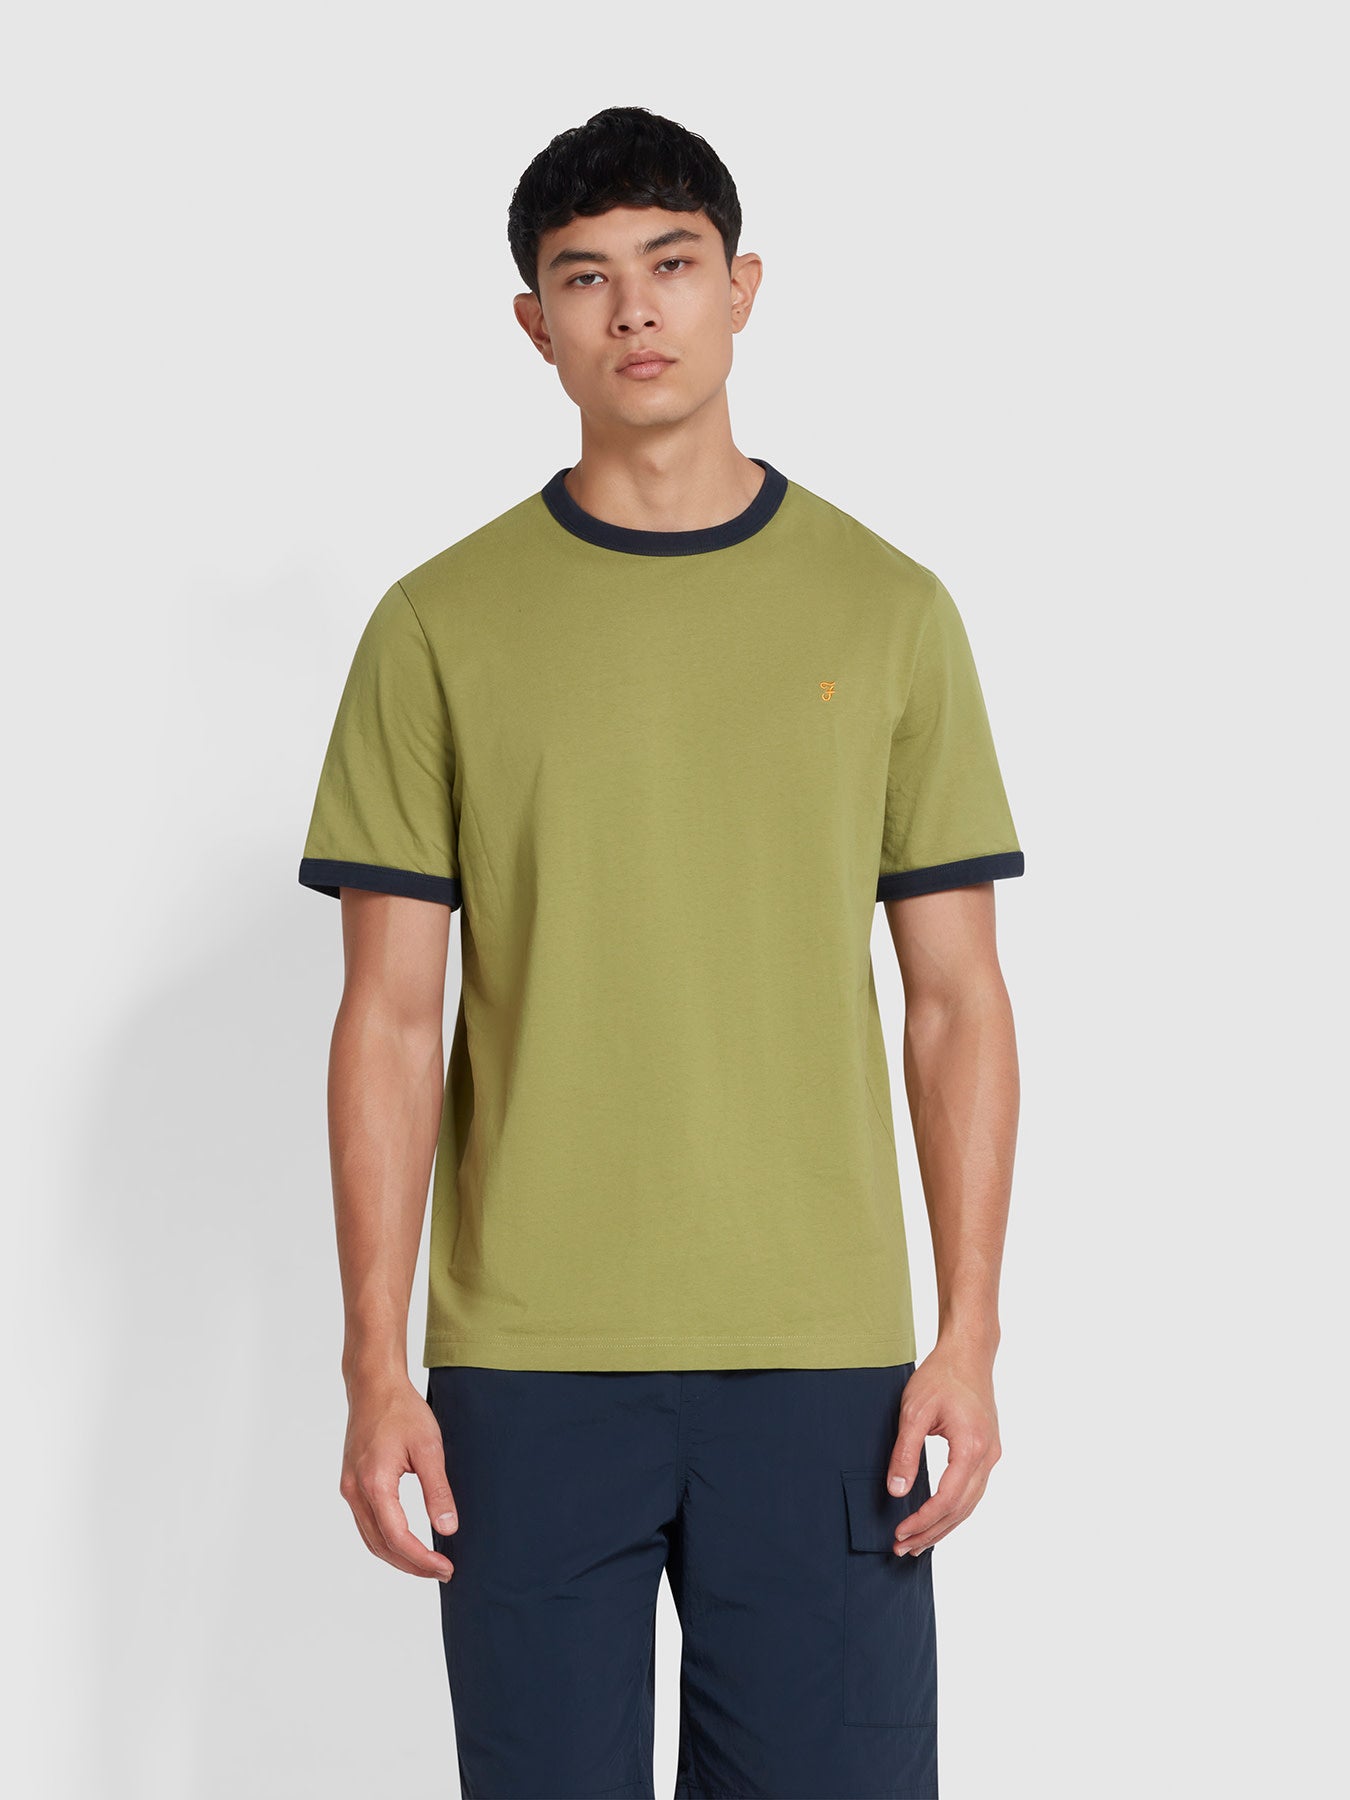 View Groves Regular Fit TShirt In Moss Green information